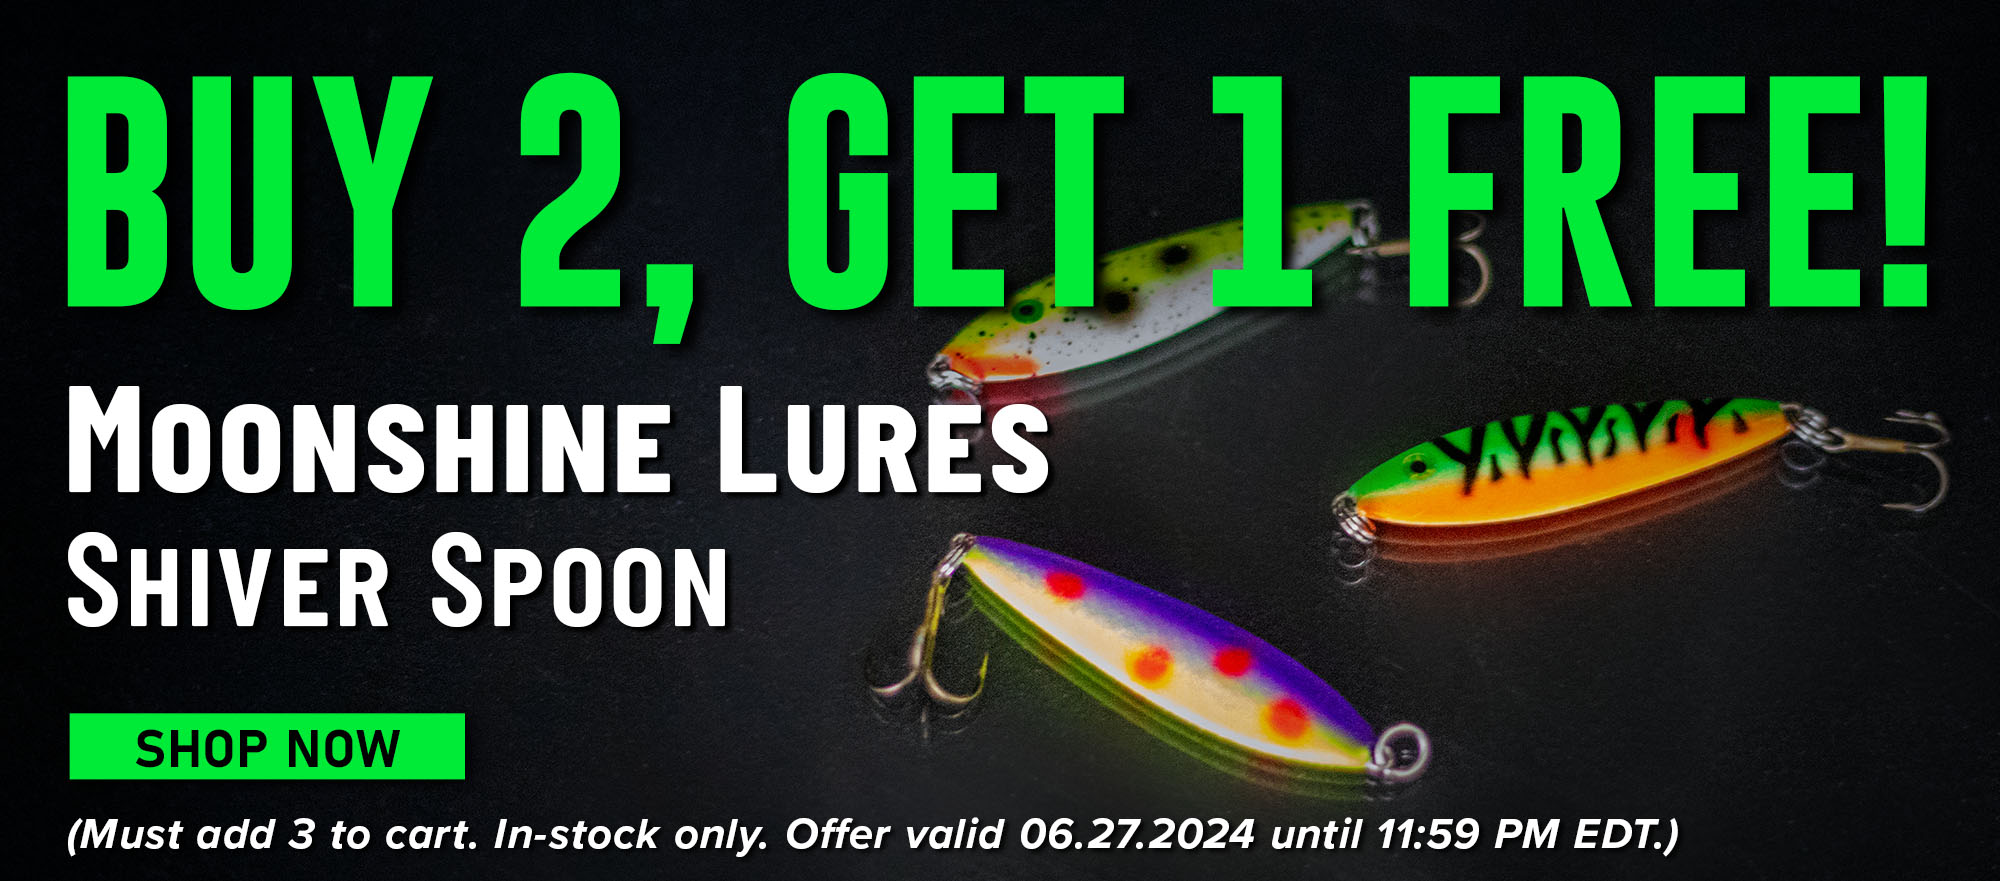 Buy 2, Get 1 Free! Moonshine Lures Shiver Spoon Shop Now (Must add 3 to cart. In-stock only. Offer valid 06.27.2024 until 11:59 PM EDT.)